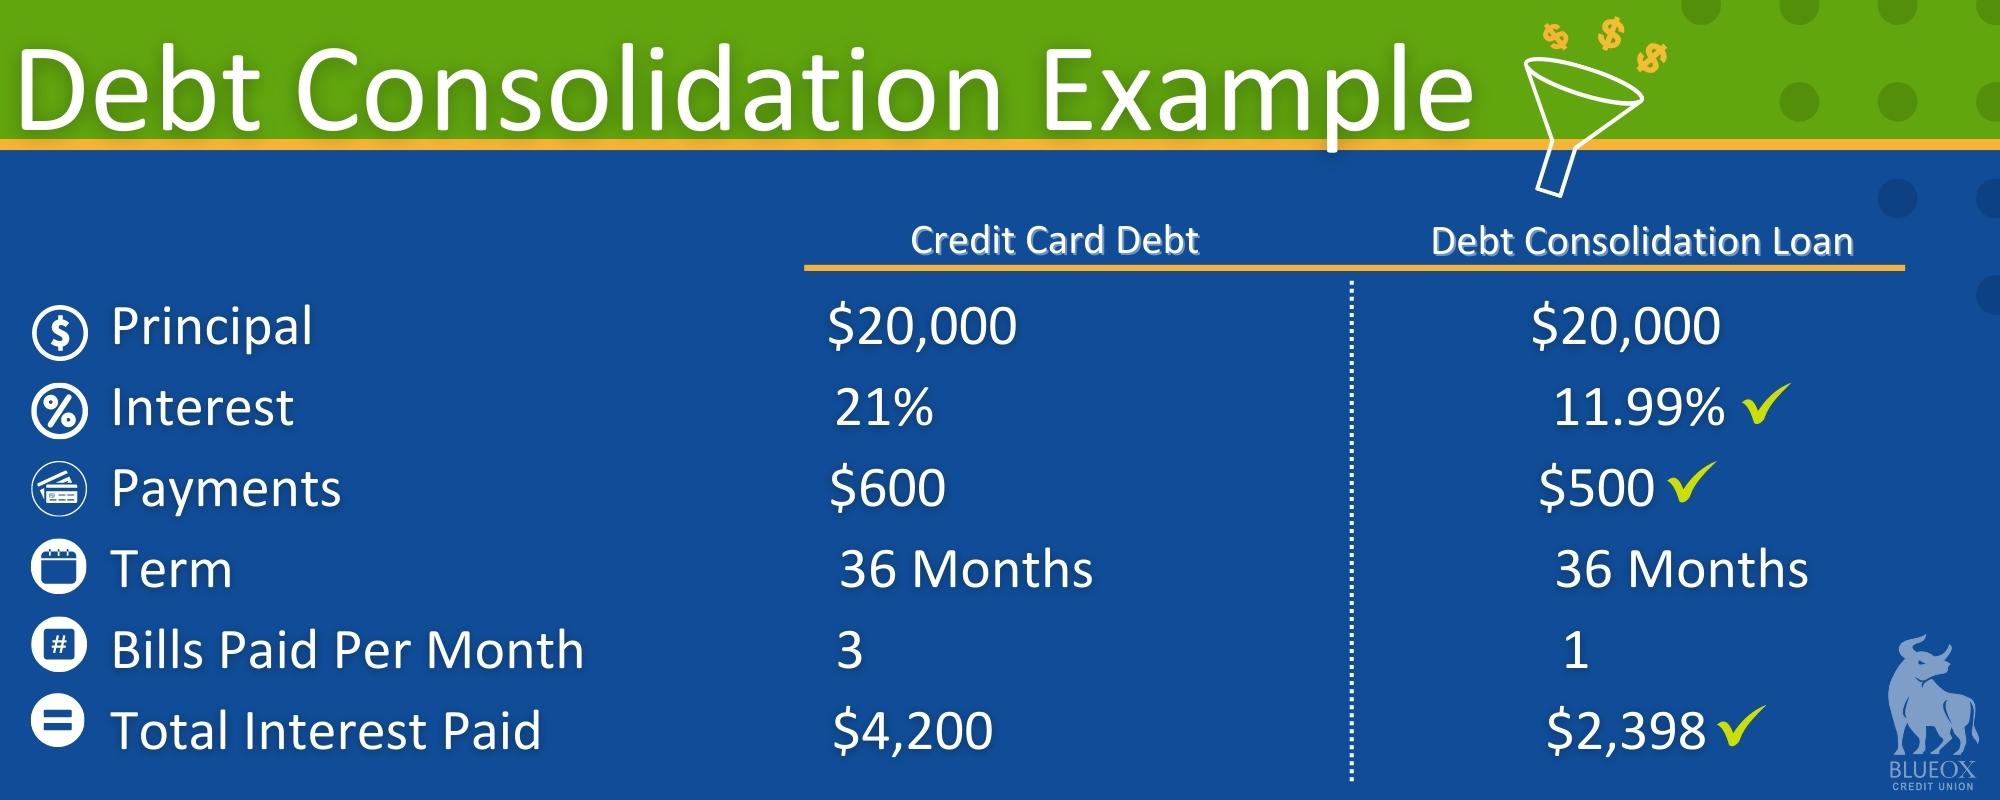 Debt Consolidation Example - BlueOx Credit Union